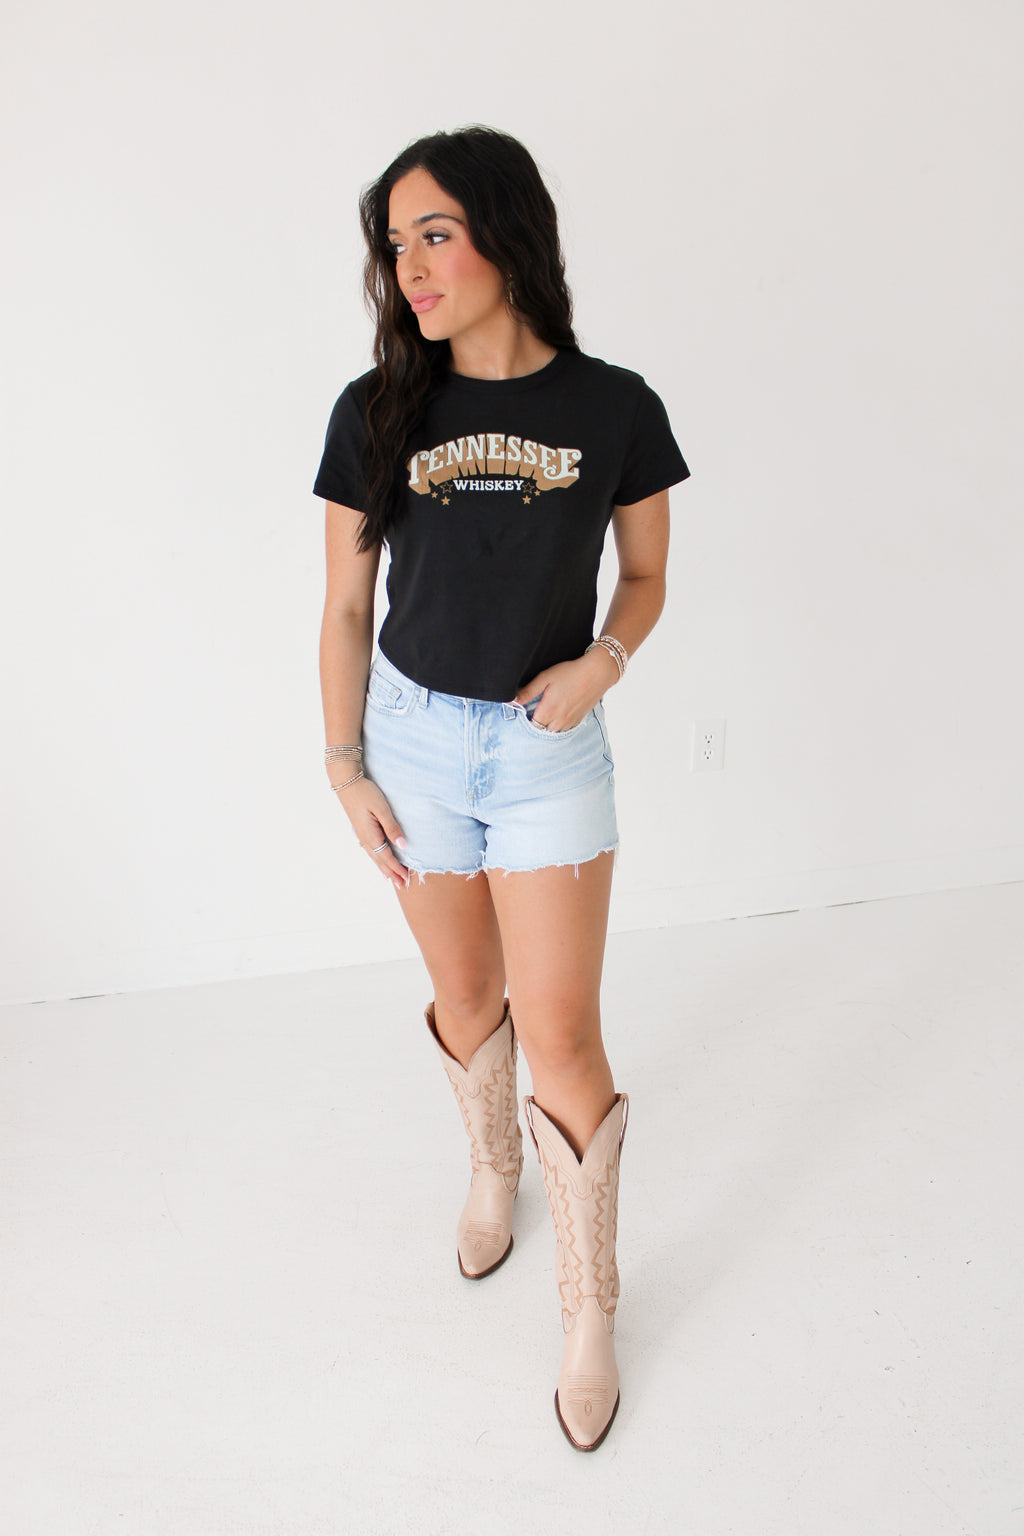 TENNESSEE WHISKEY BABY TEE